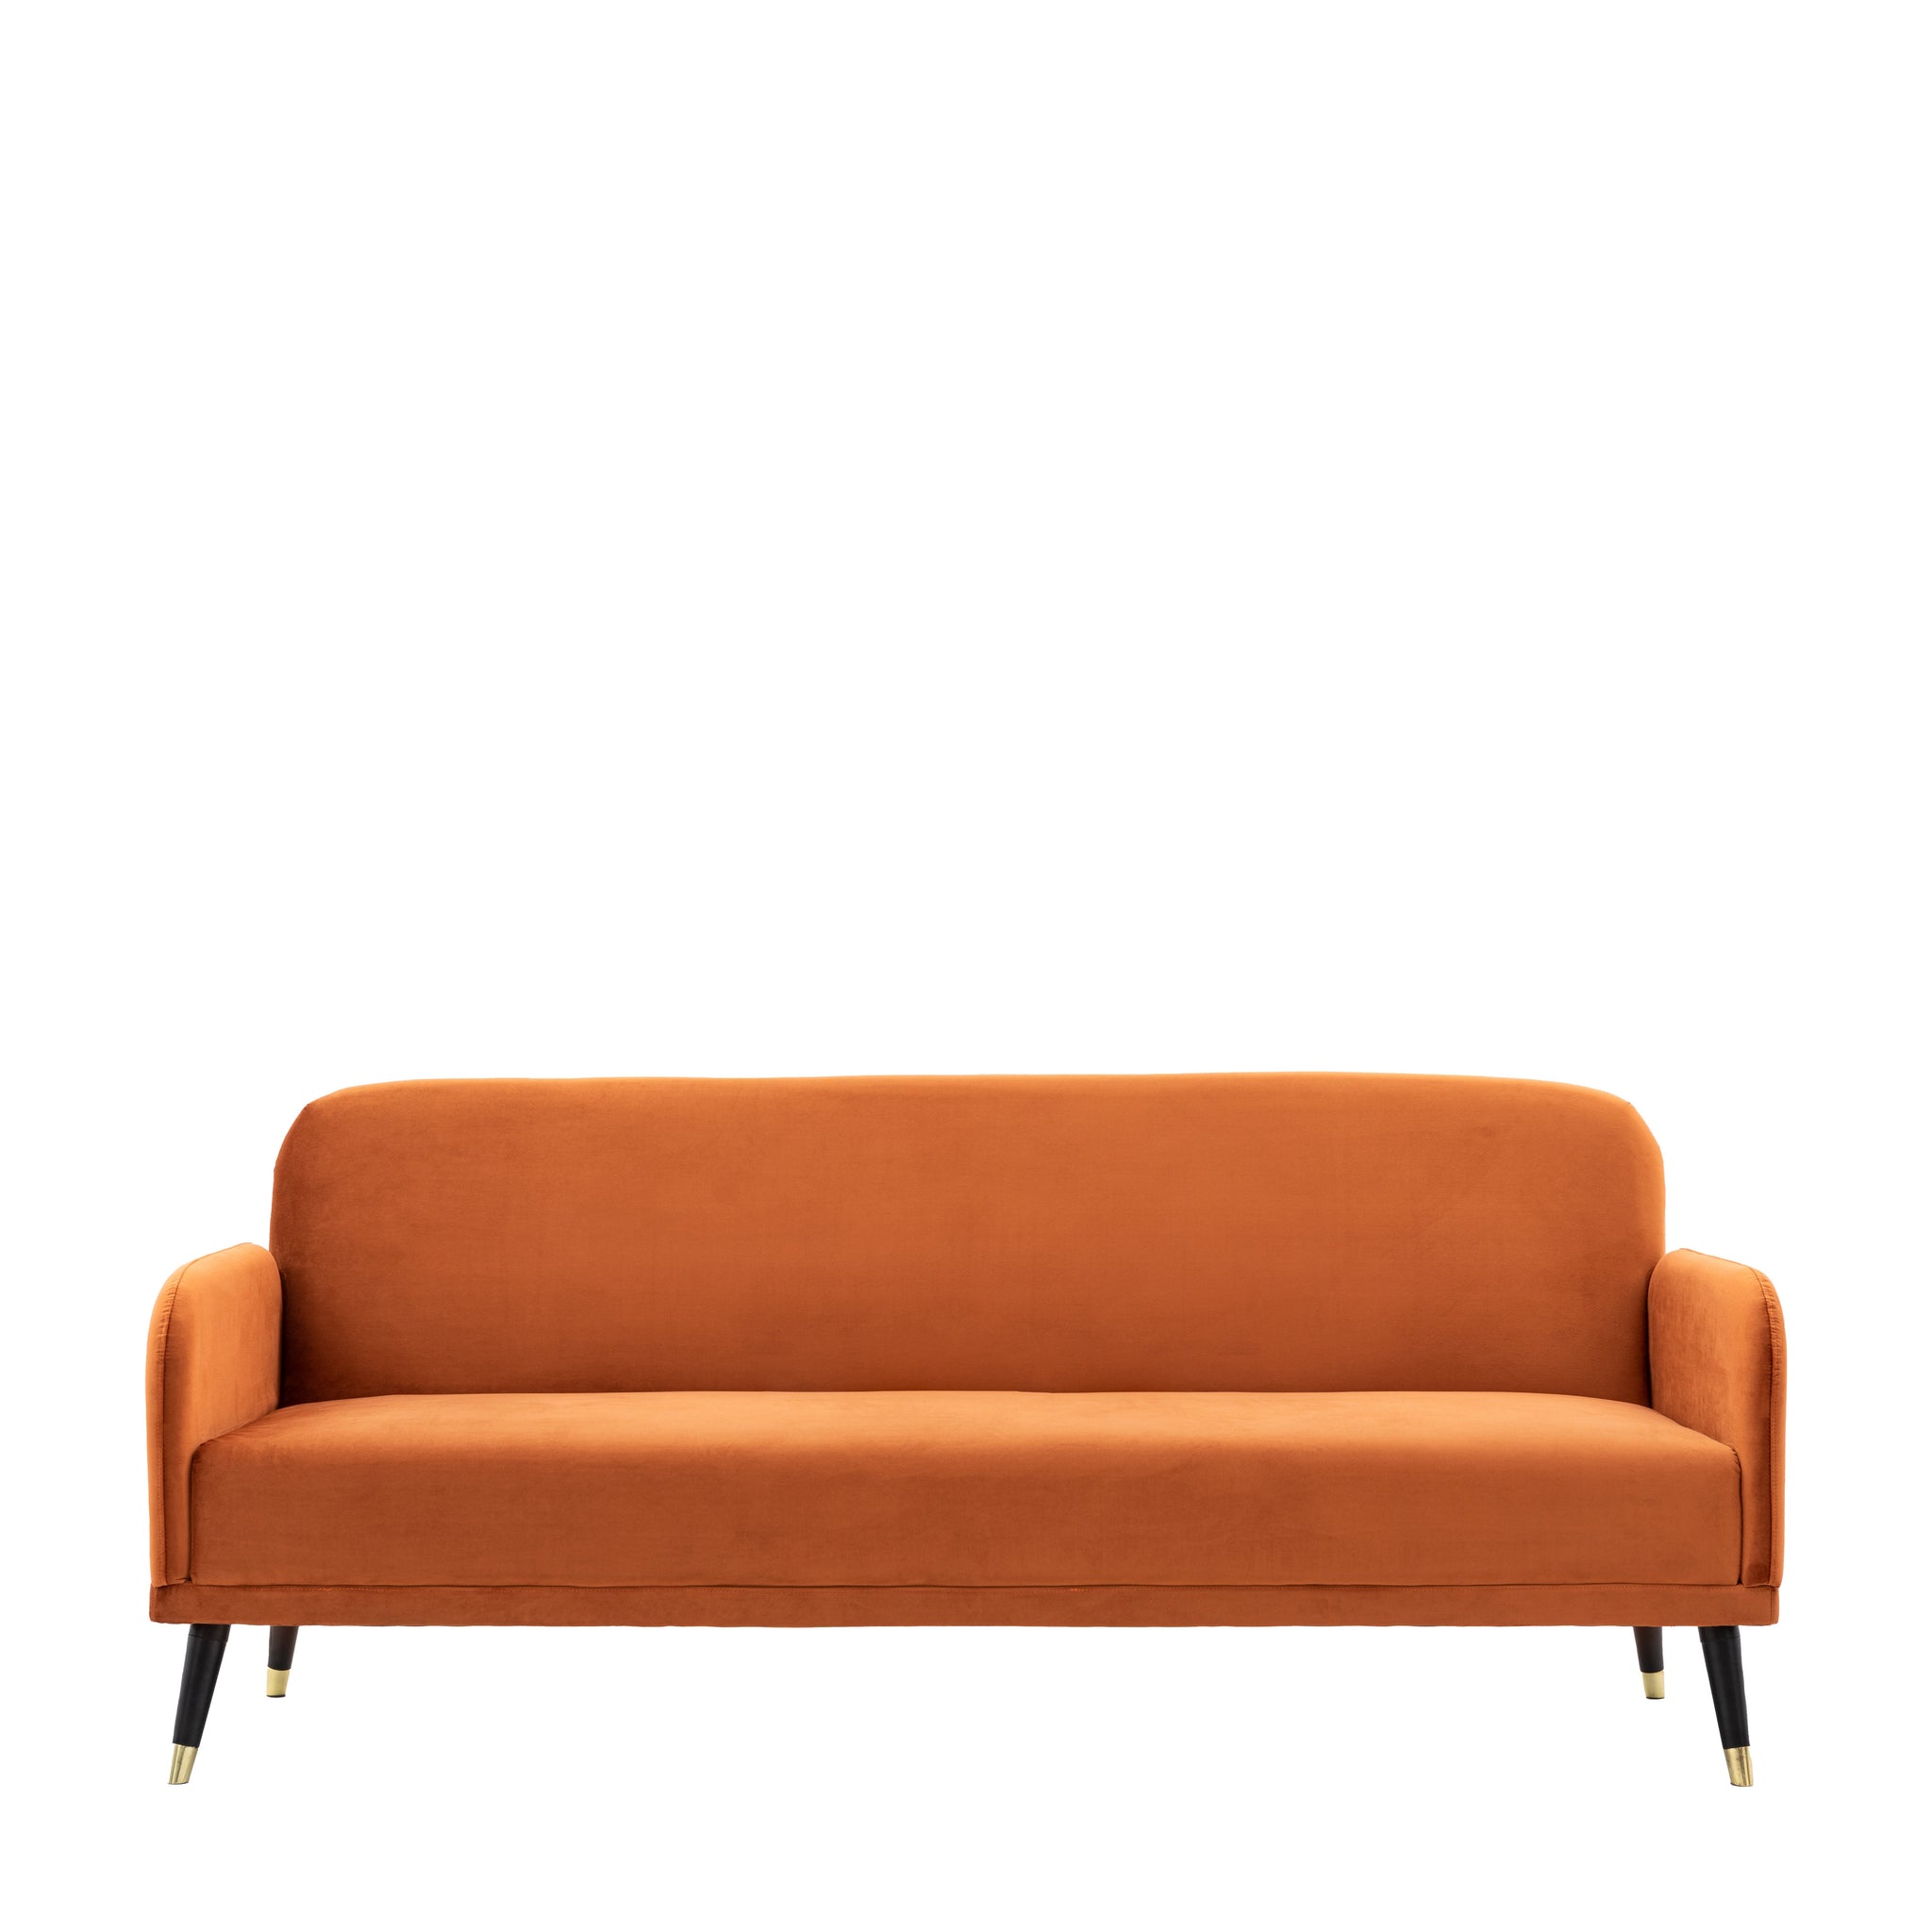 Holtby Sofa Bed Rust